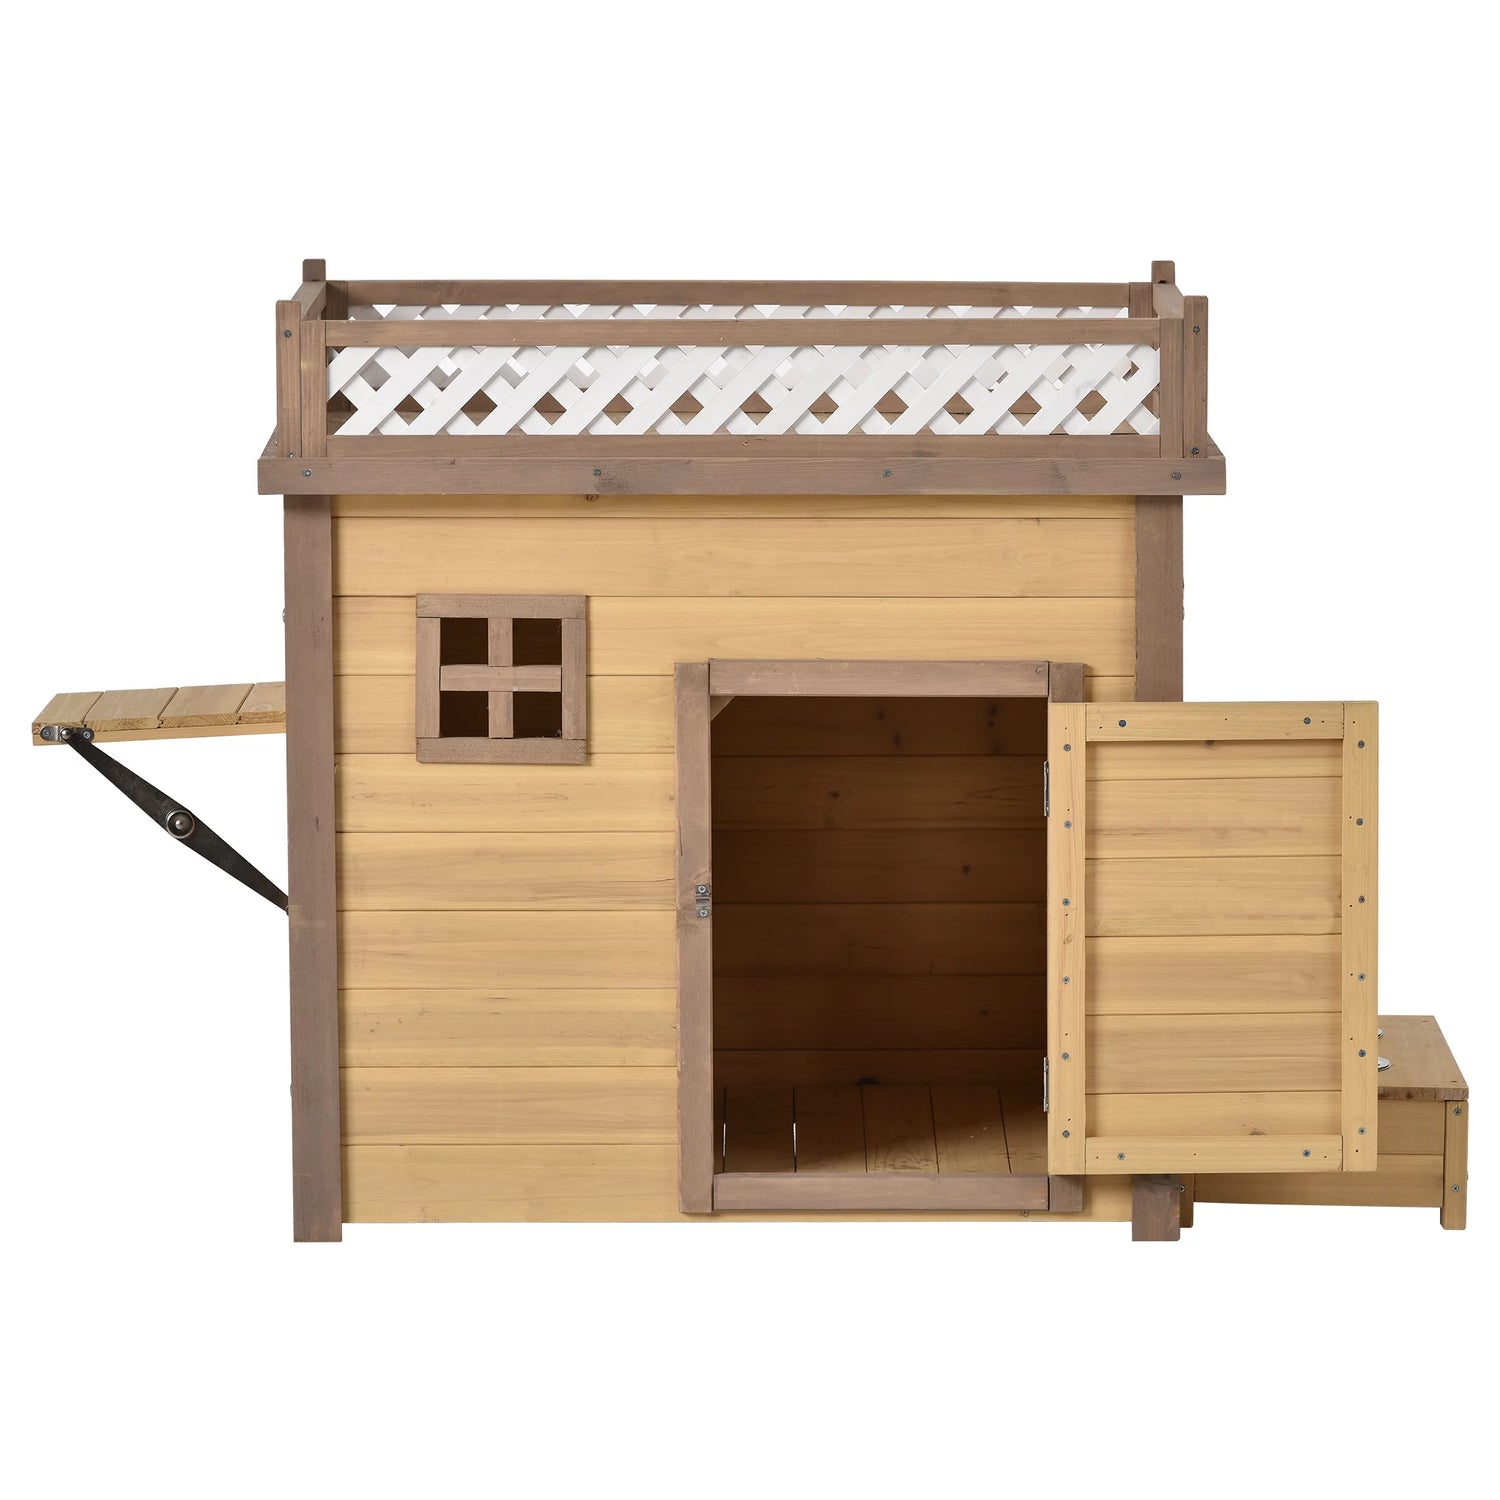 Atotoa 31.5" Wooden Dog House Puppy Shelter Kennel Outdoor & Indoor Dog Crate, with Flower Stand, Plant Stand, with Wood Feeder